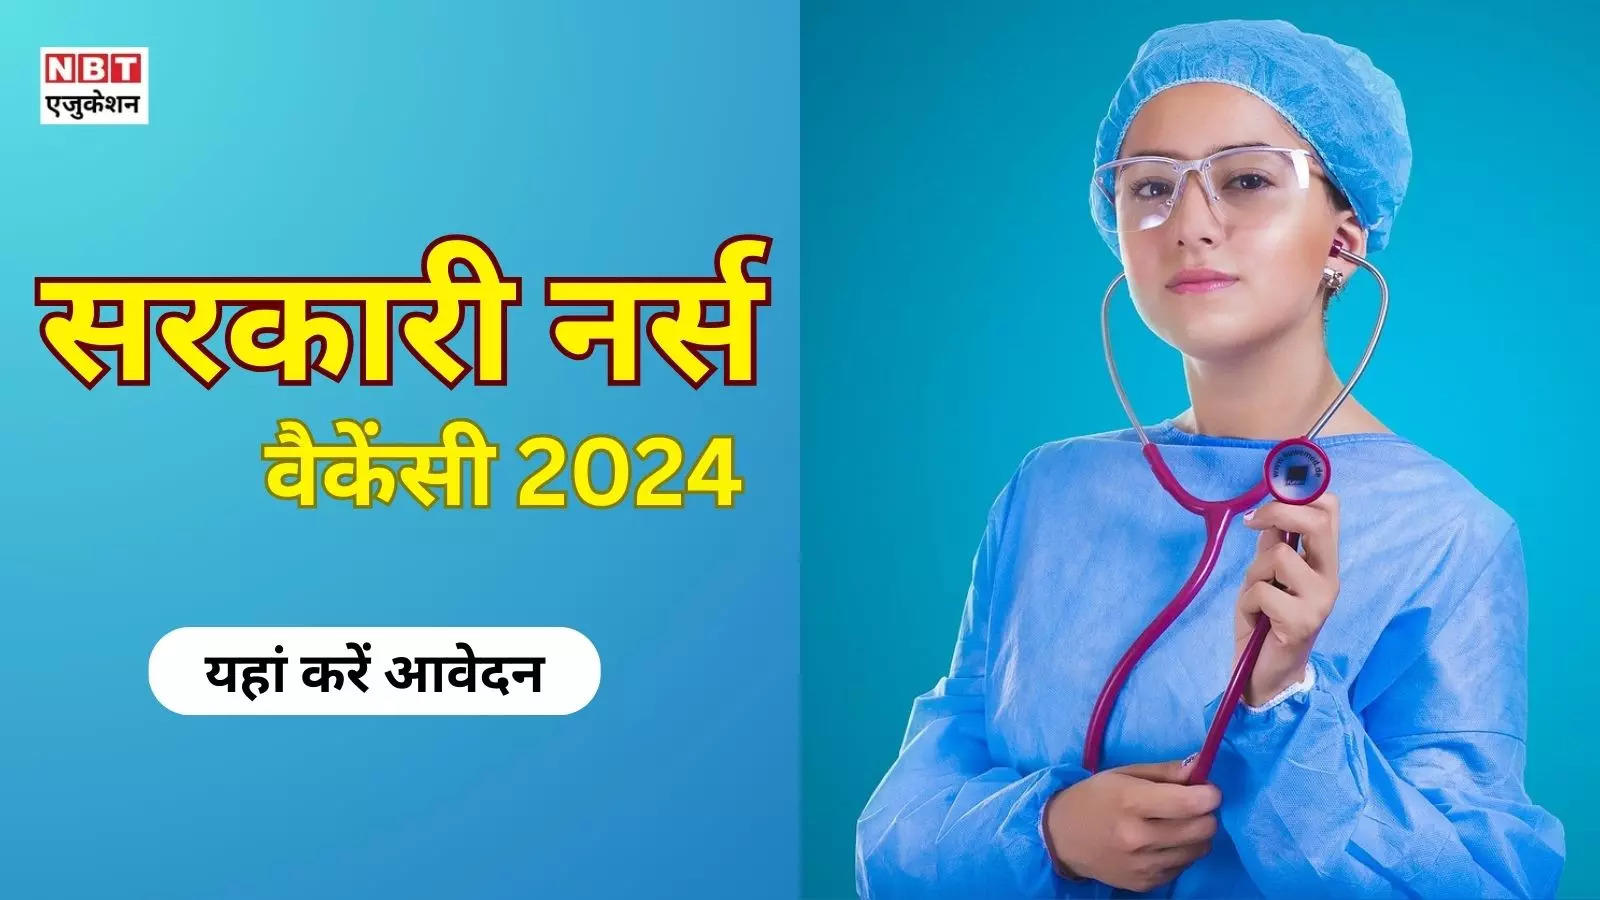 Staff Nurse Vacancy 2024: Opportunity to become a government nurse, new vacancy for staff nurse in this medical college hospital